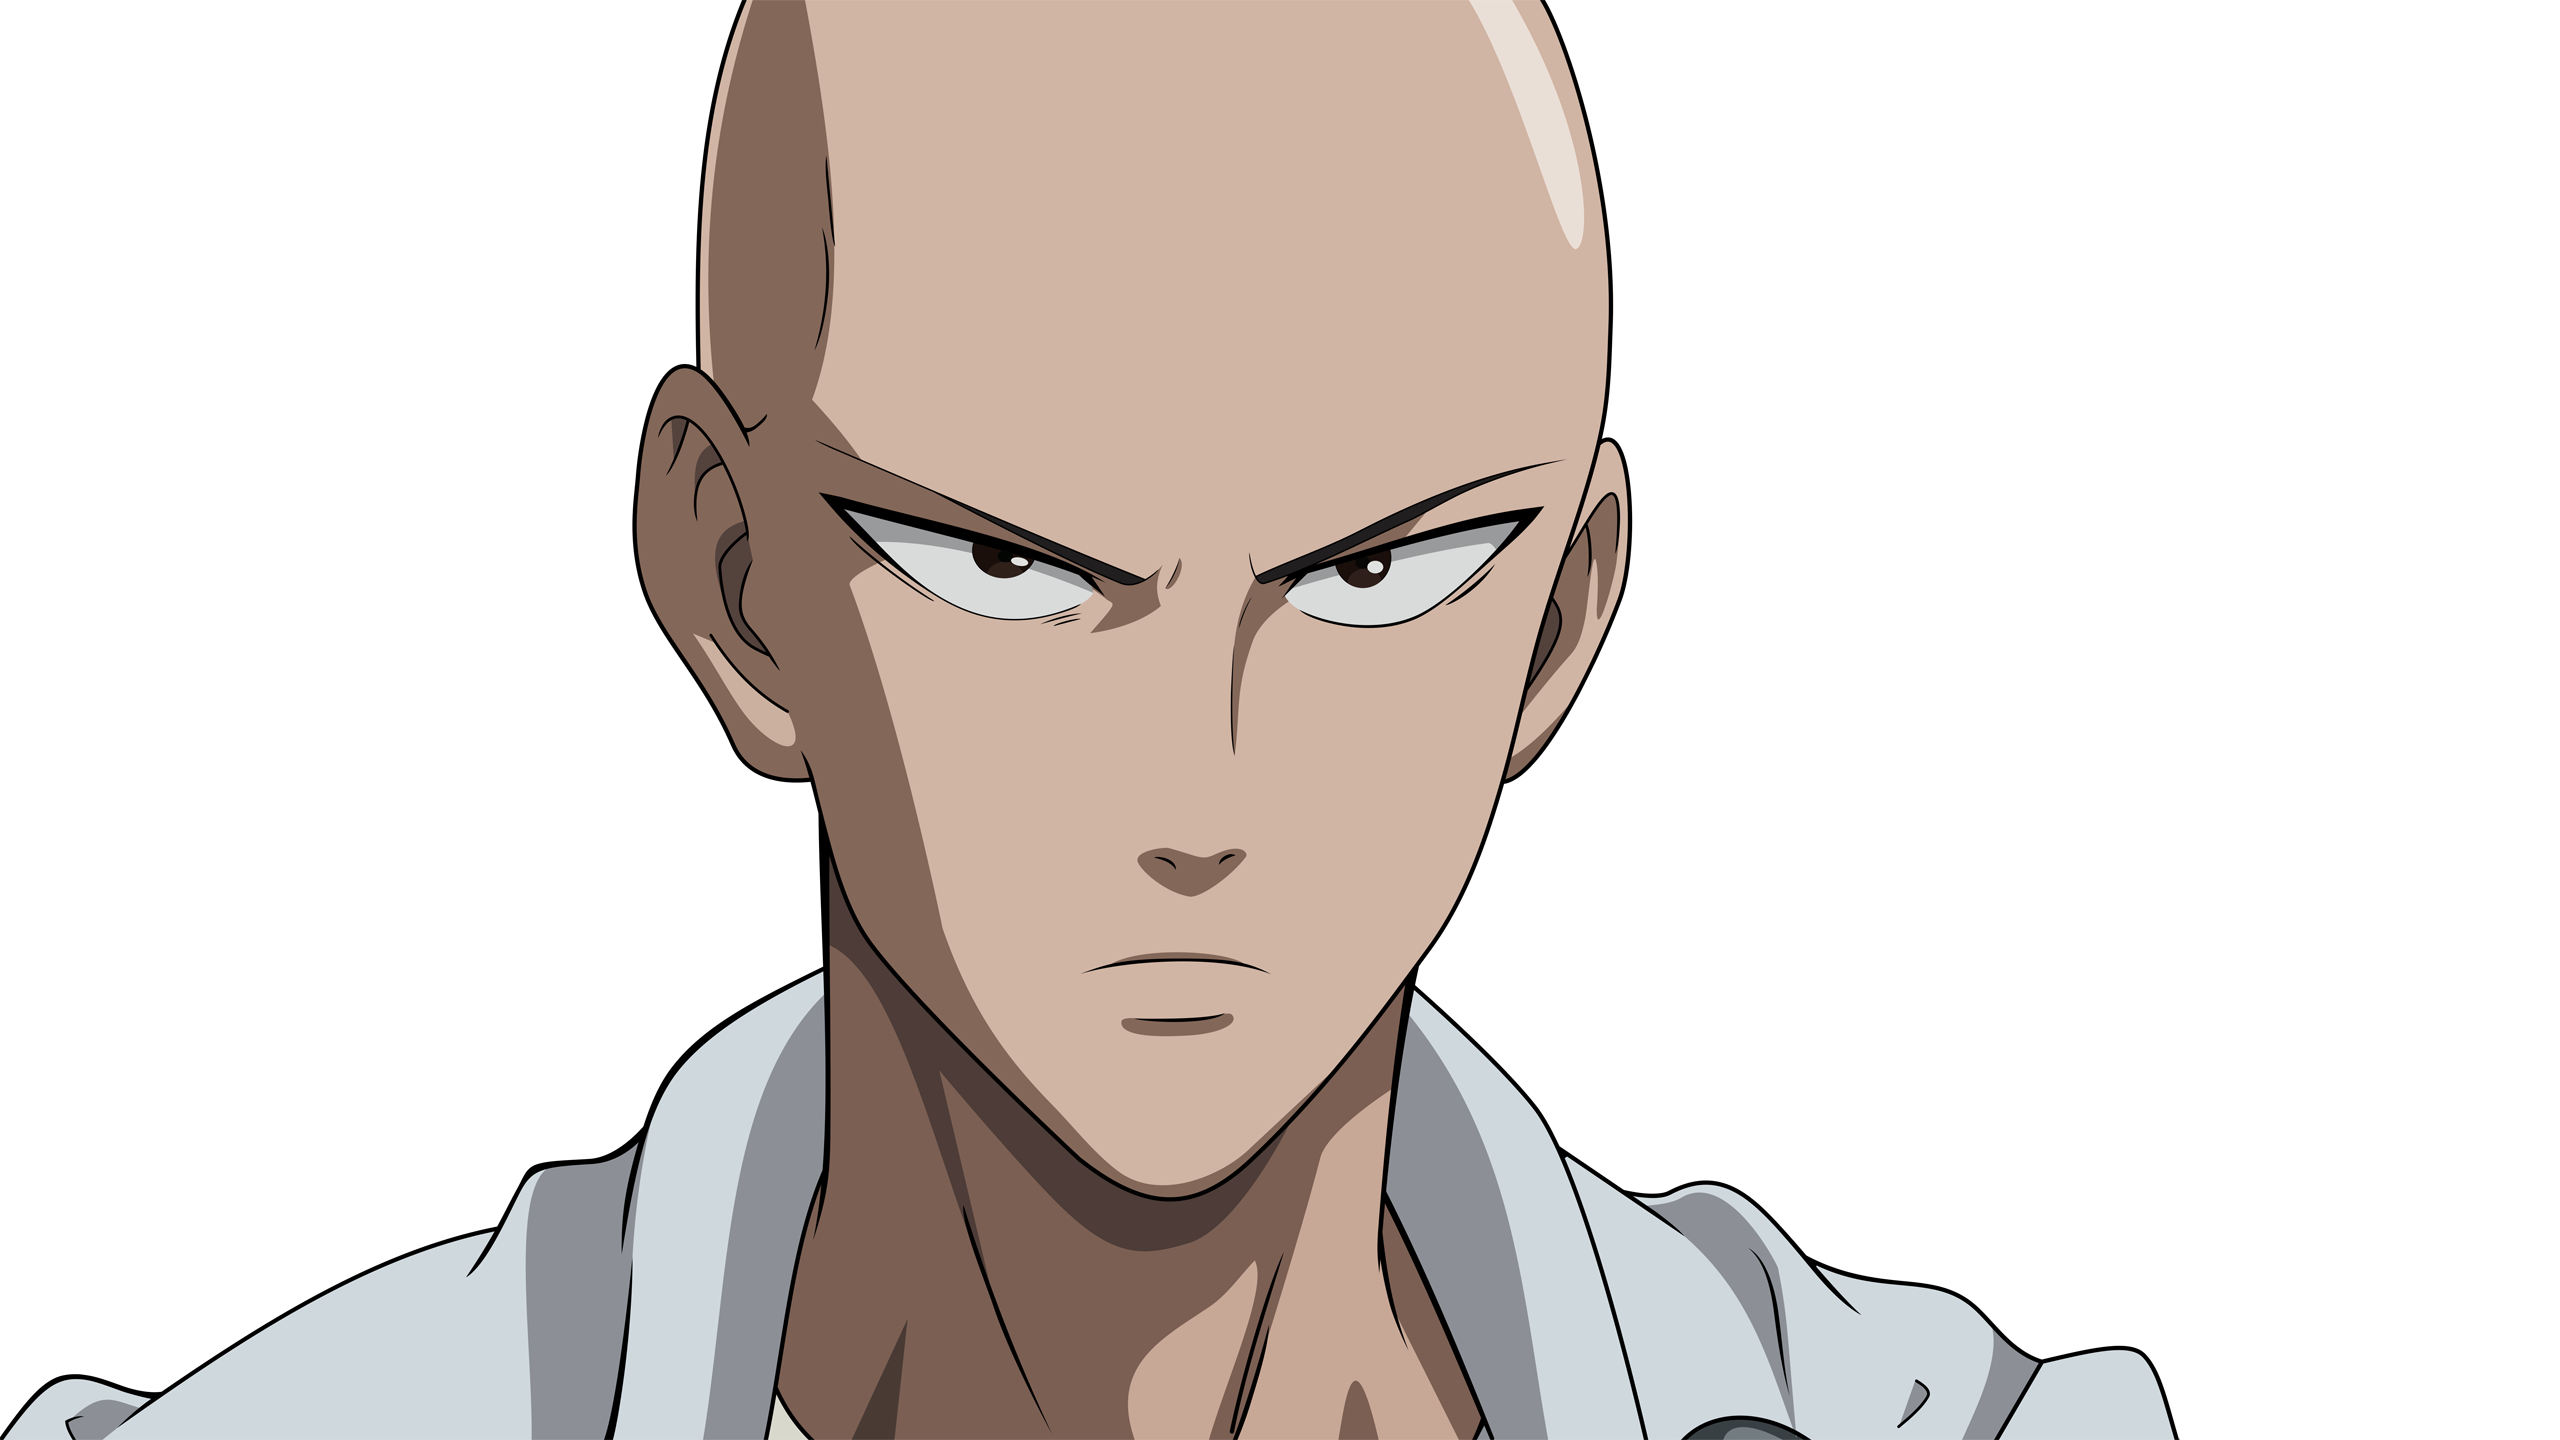 9. "Saitama" from One Punch Man - wide 5